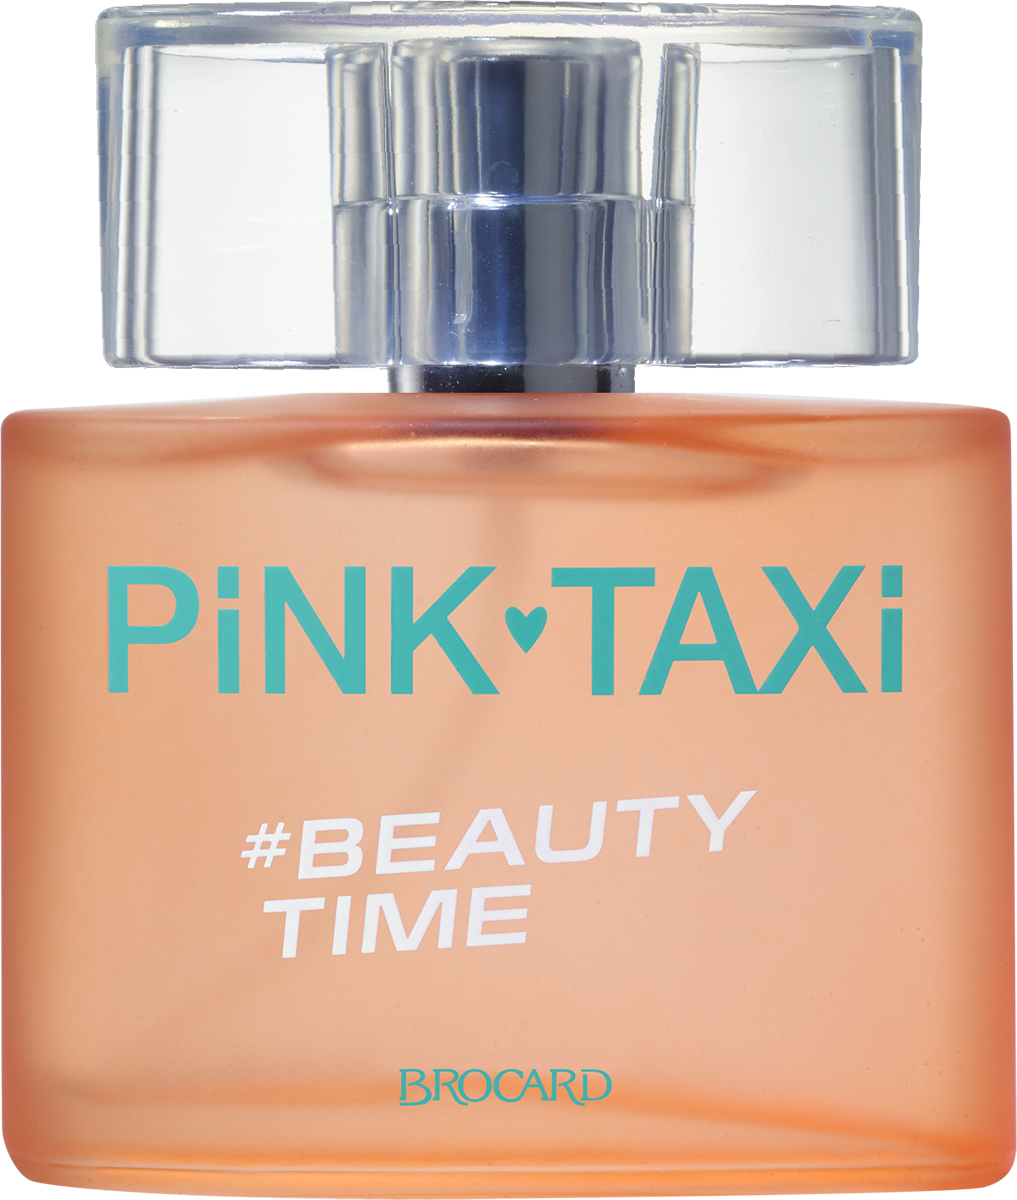 Pink Taxi. Beauty Time